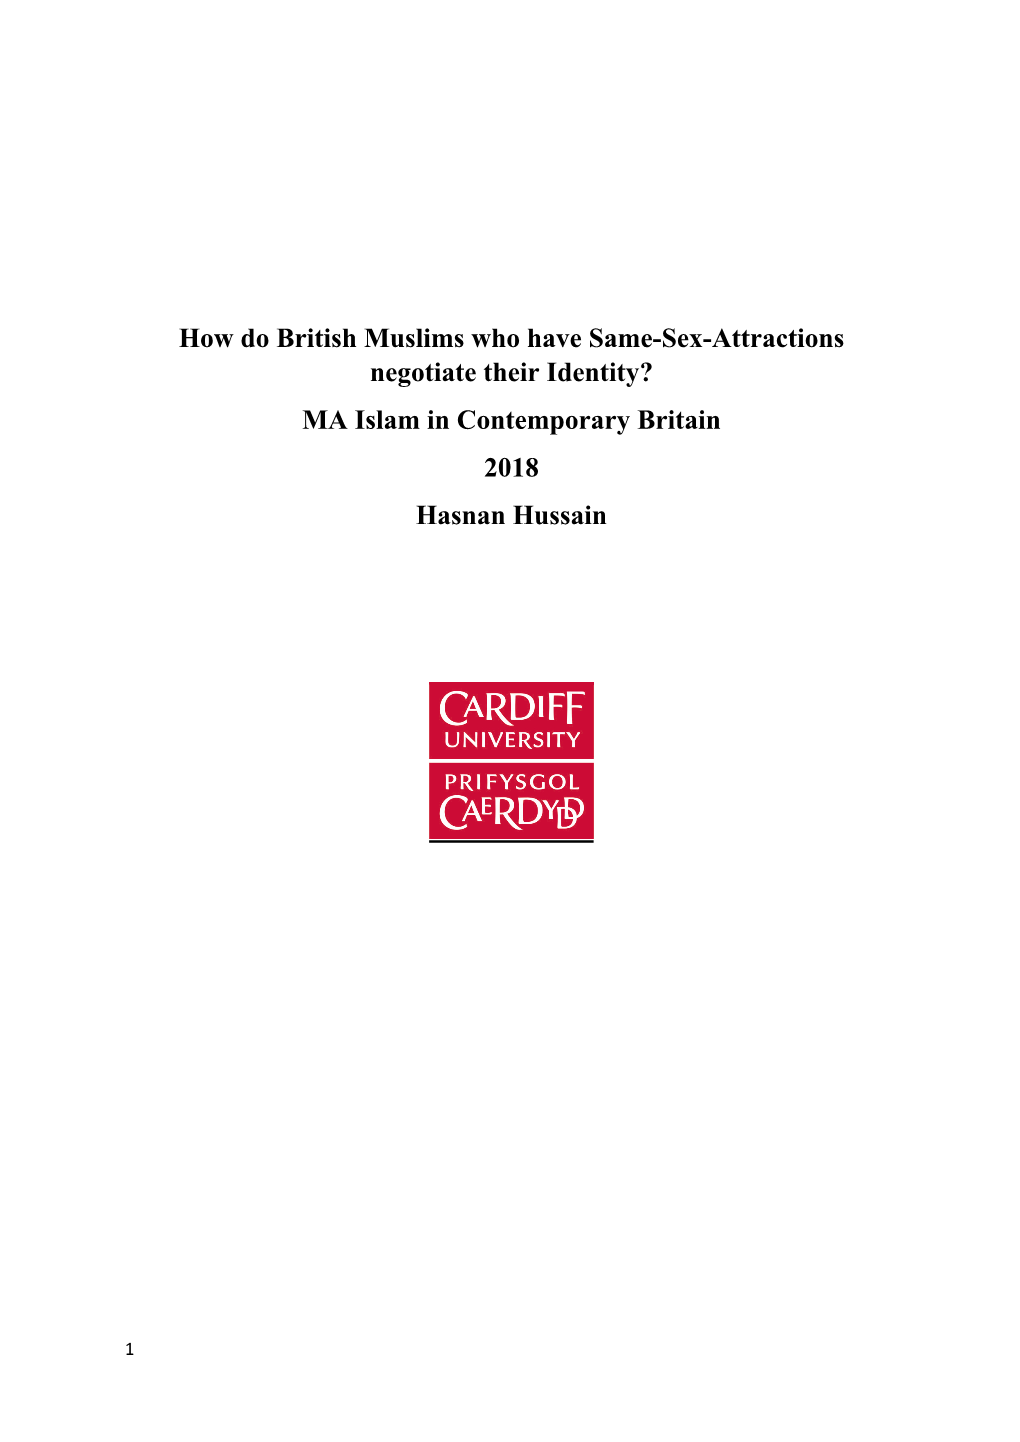 How Do British Muslims Who Have Same-Sex-Attractions Negotiate Their Identity? MA Islam in Contemporary Britain 2018 Hasnan Hussain